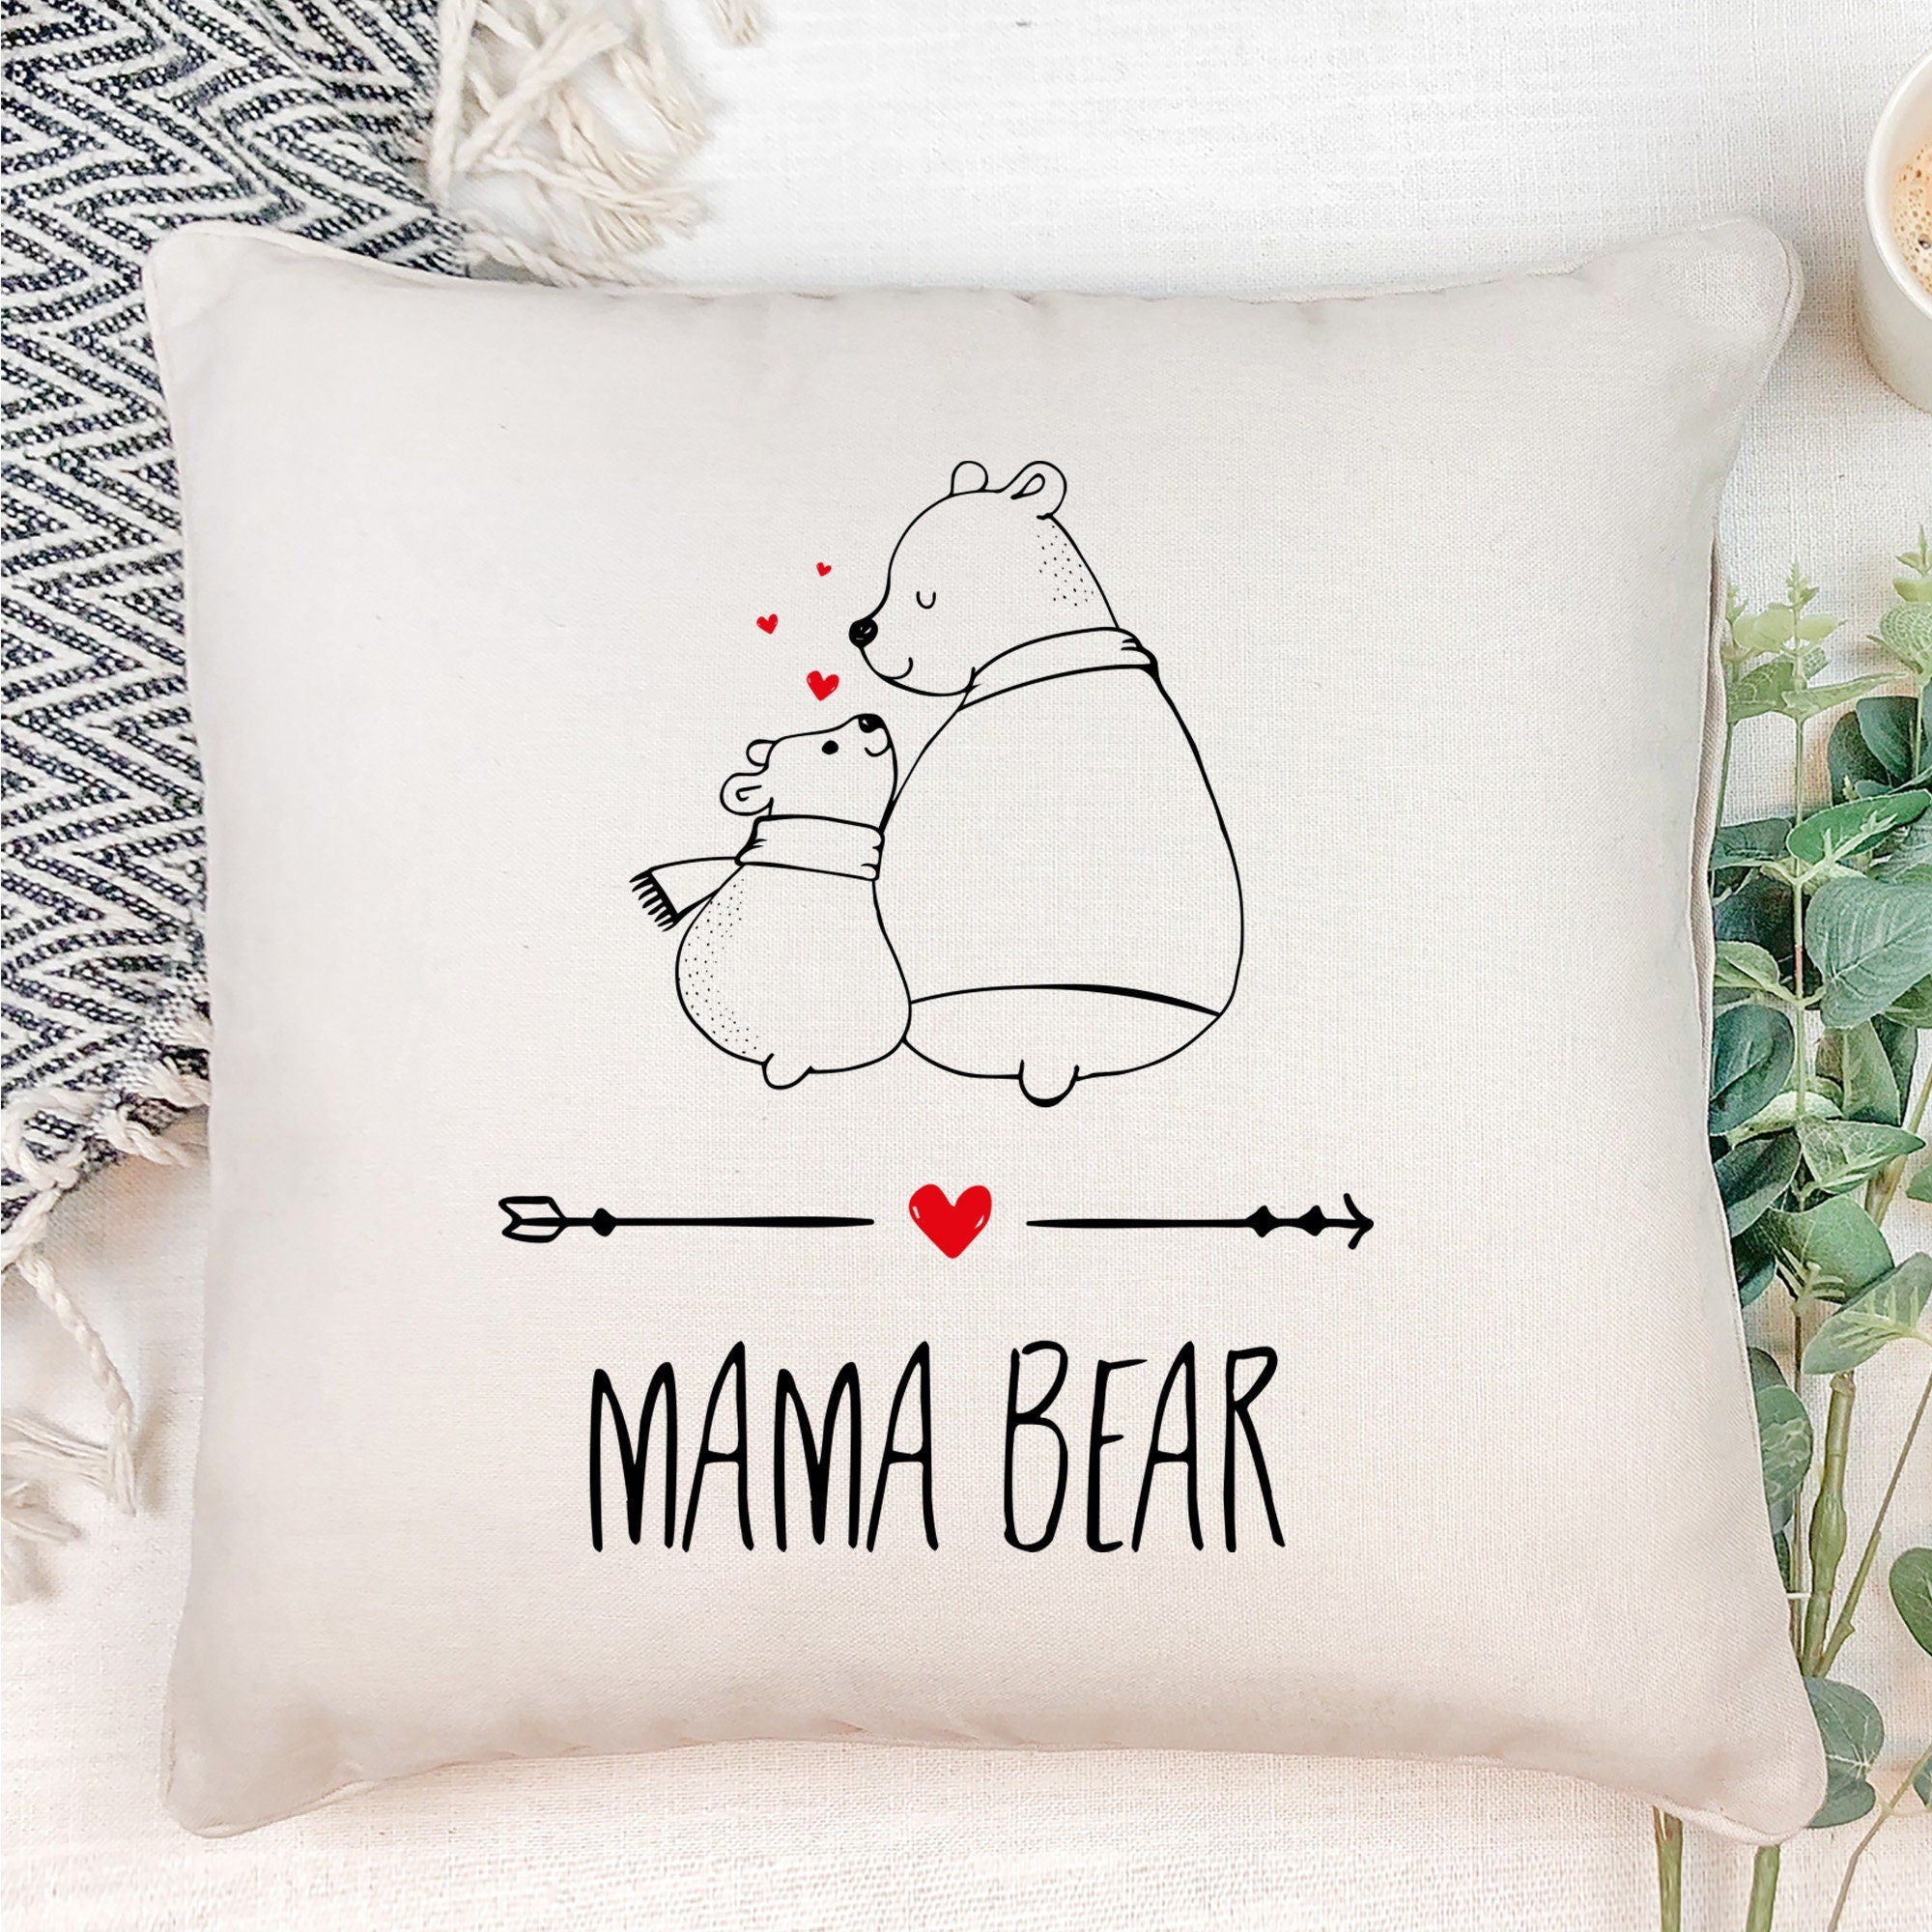 MAMA bear cushion, Gift for mum, Mother's day present, Mummy pillow, Mother bear